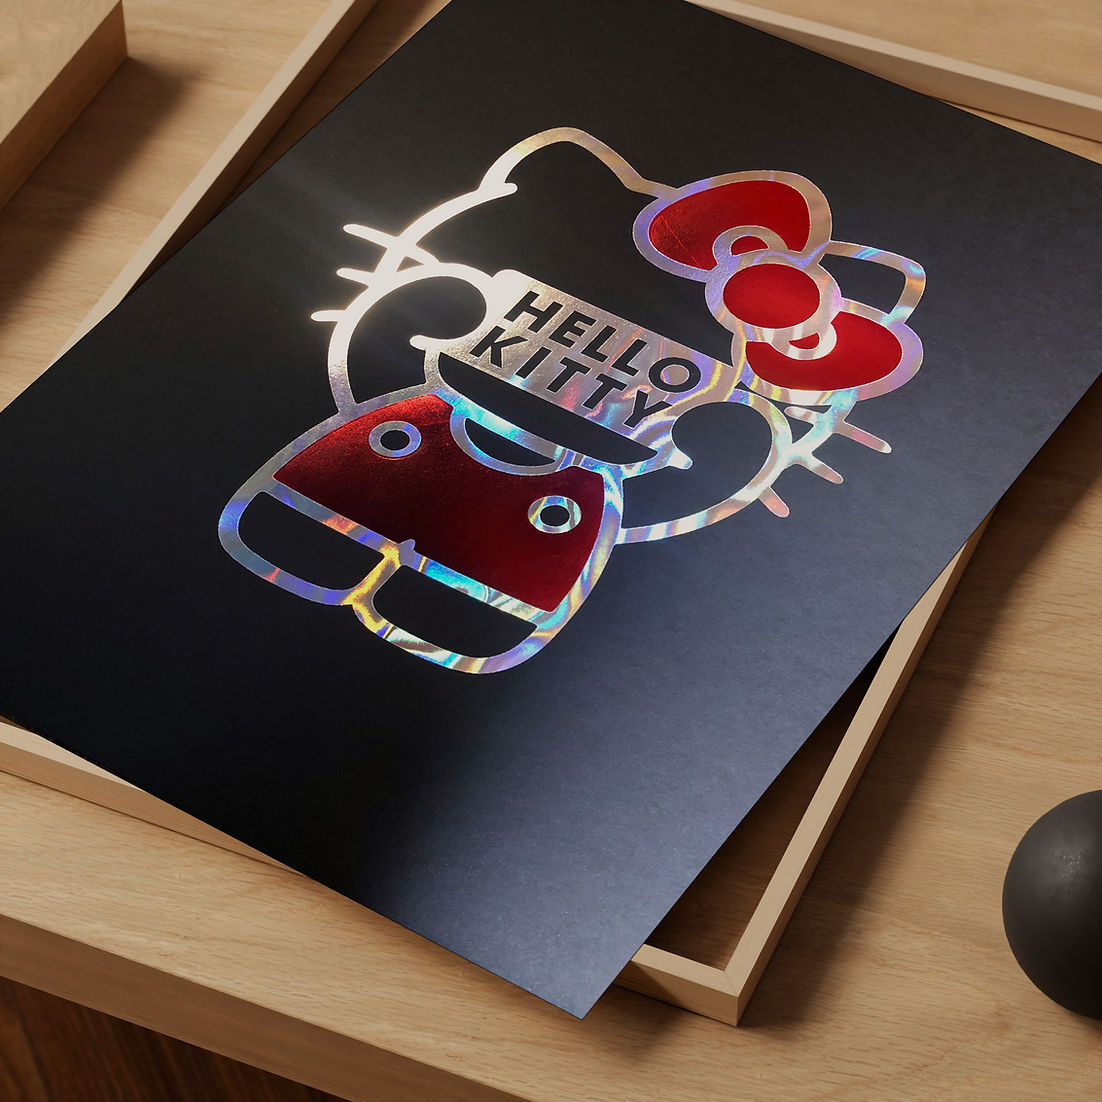 Hello Kitty Iconic Holographic Art Print On Wooden Table